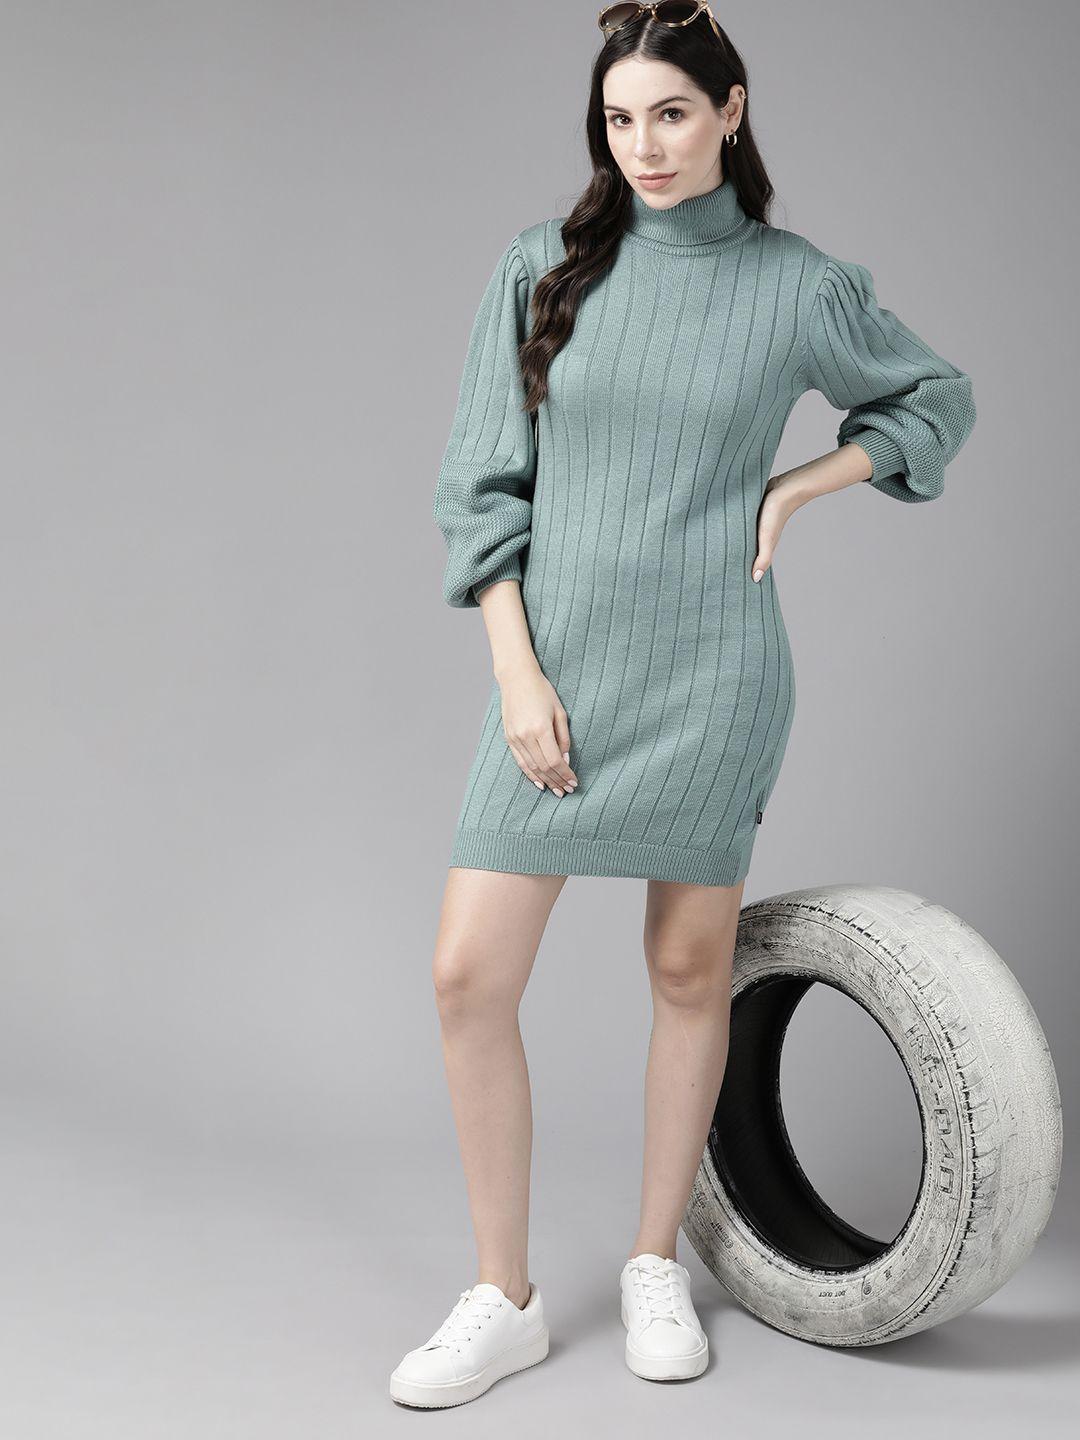 the roadster lifestyle co. turtle neck puff sleeves solid acrylic jumper dress